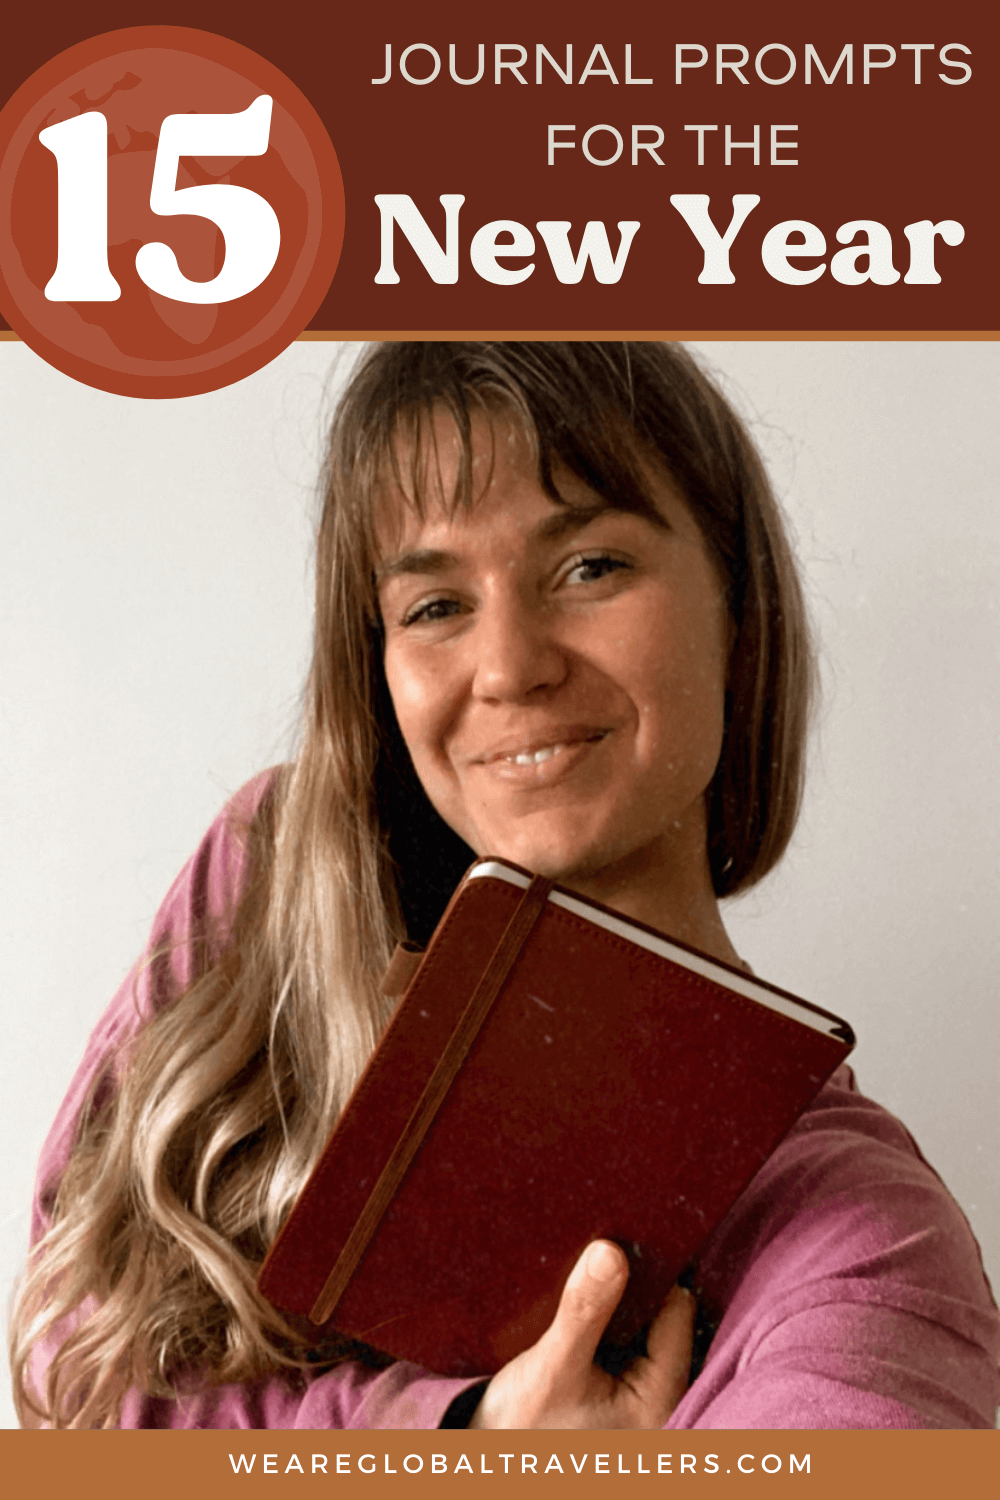 15 New Year Journal Prompts for 2023